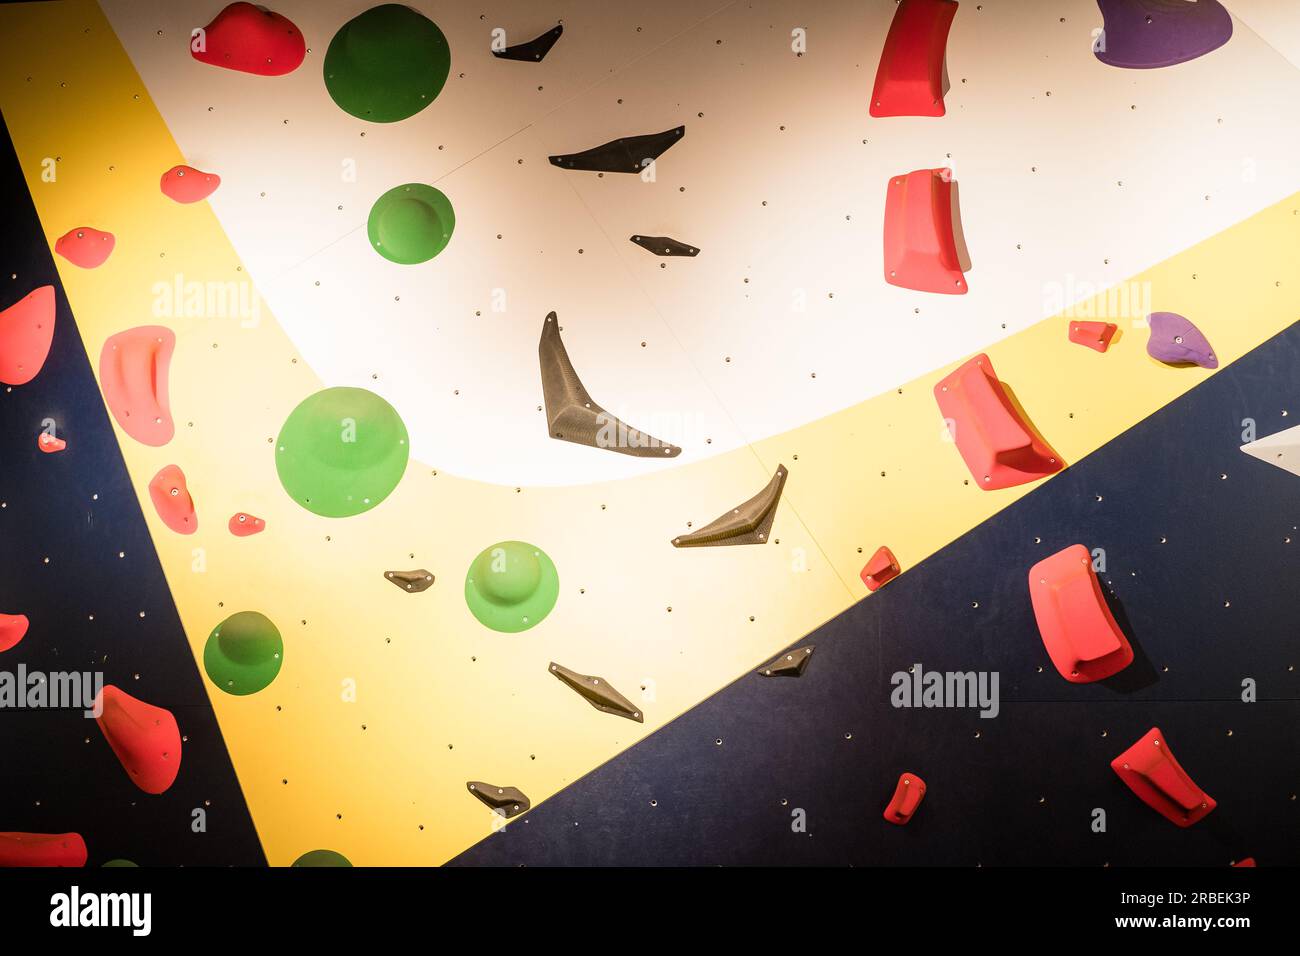 Colorful rock climbing wall with toe and hand hold studs. Wall climbing background. Stock Photo